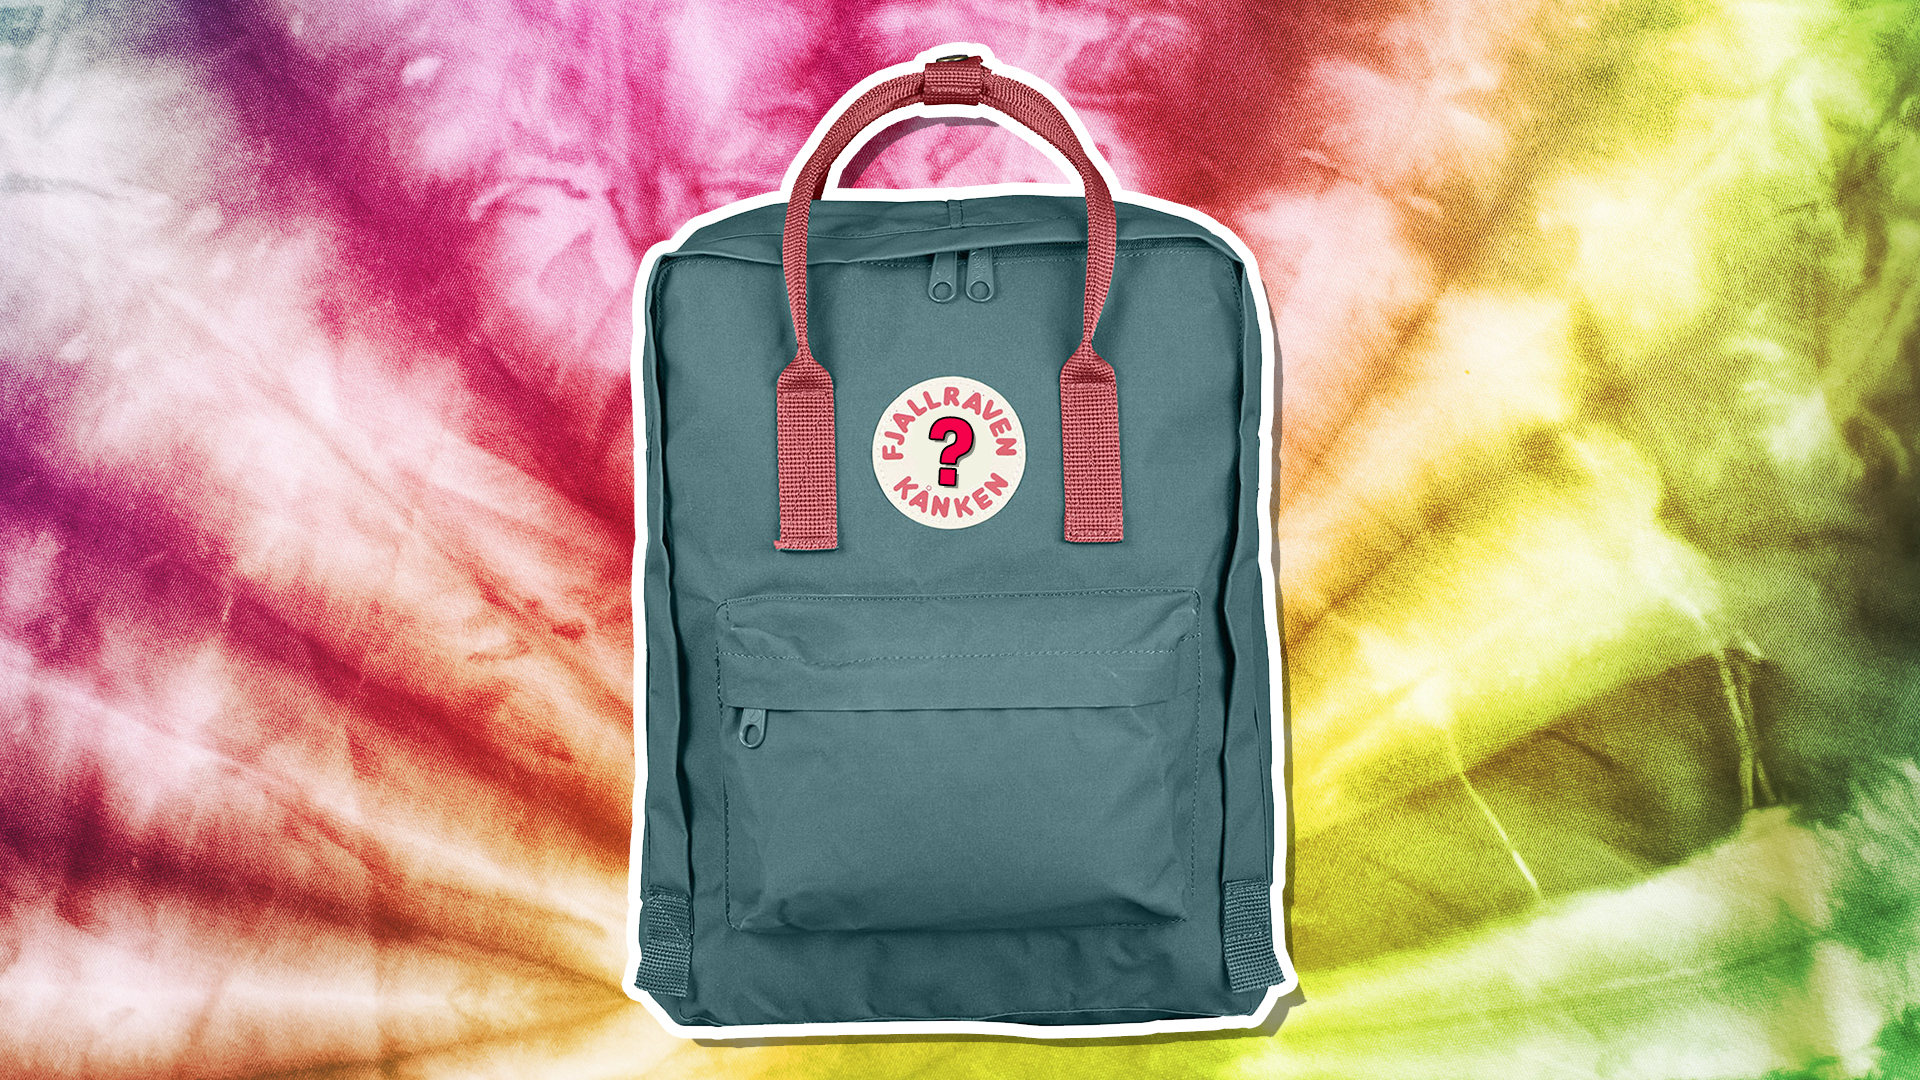 A backpack with a tie-dye background